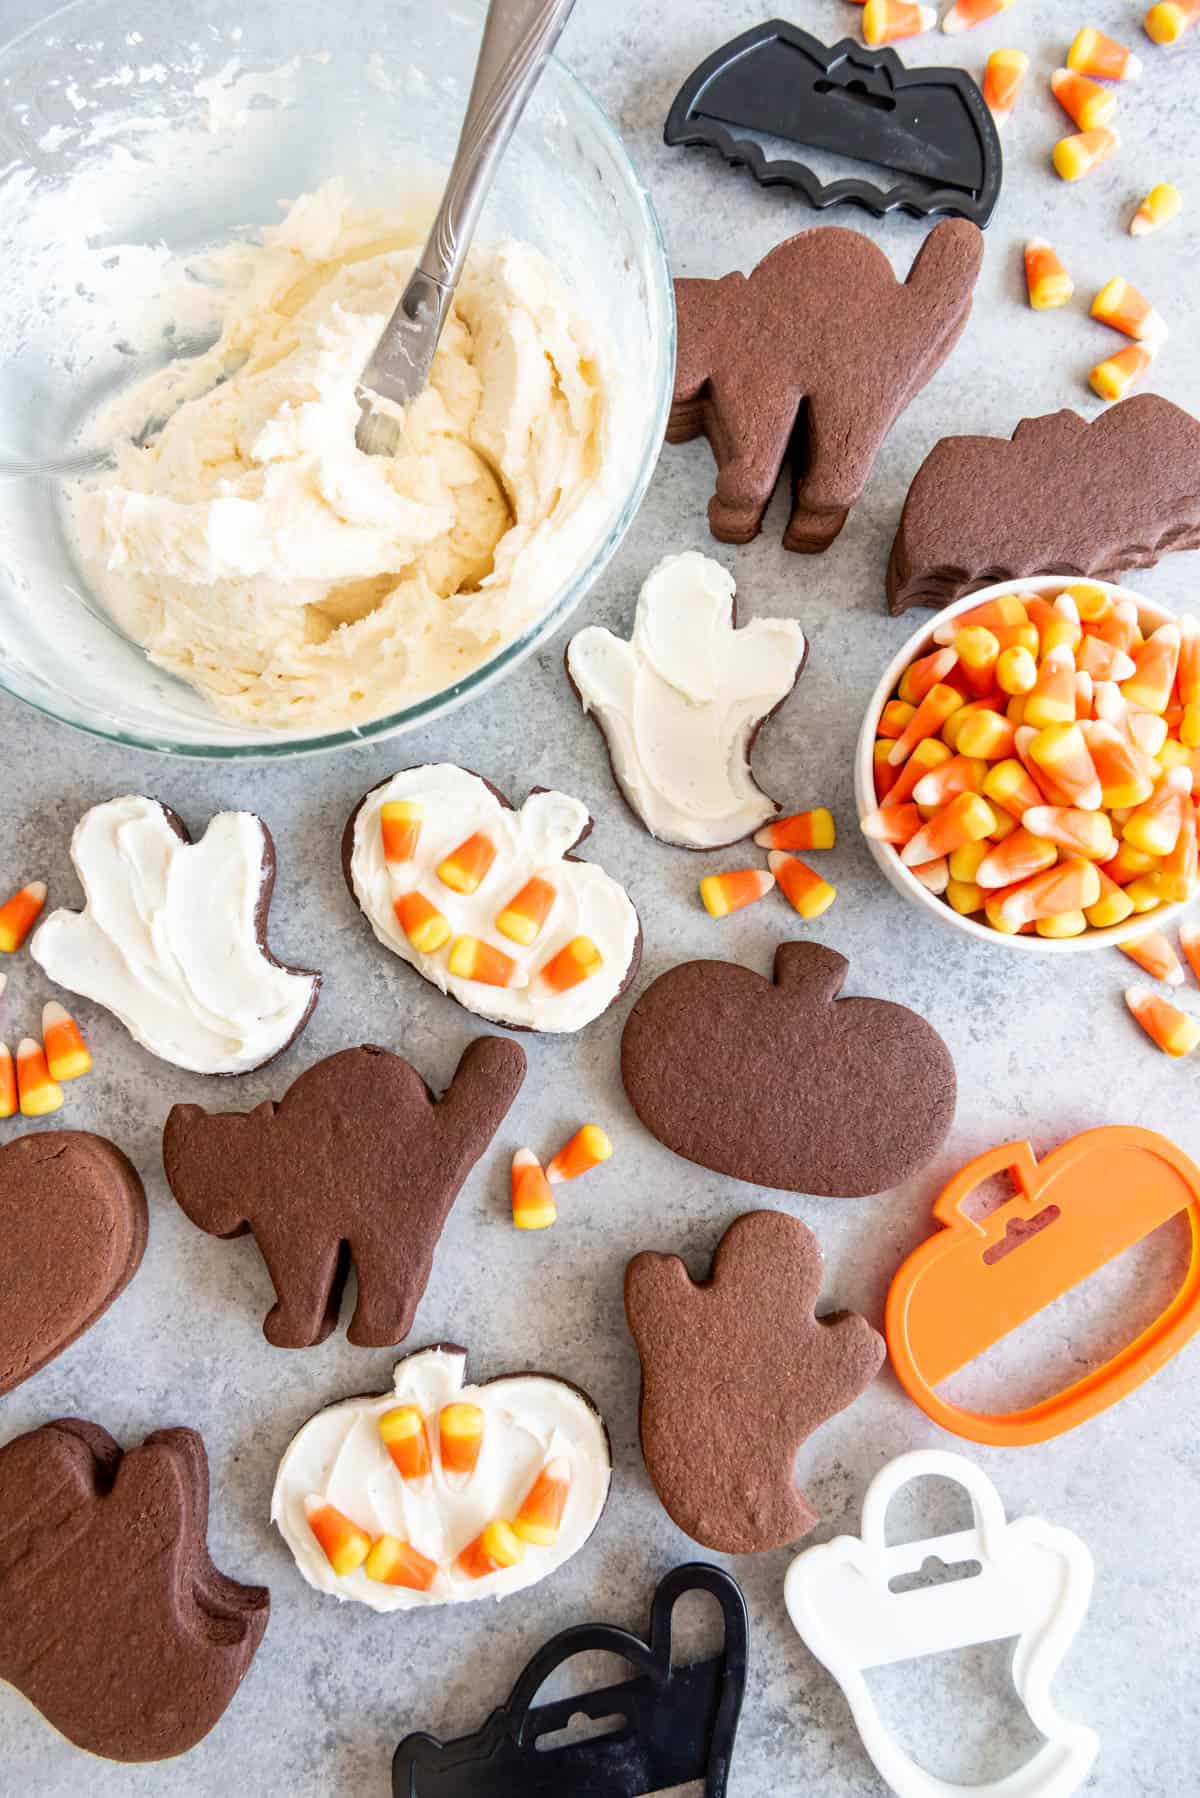 Chocolate Cut Out Sugar Cookies and frosting with candy corn.